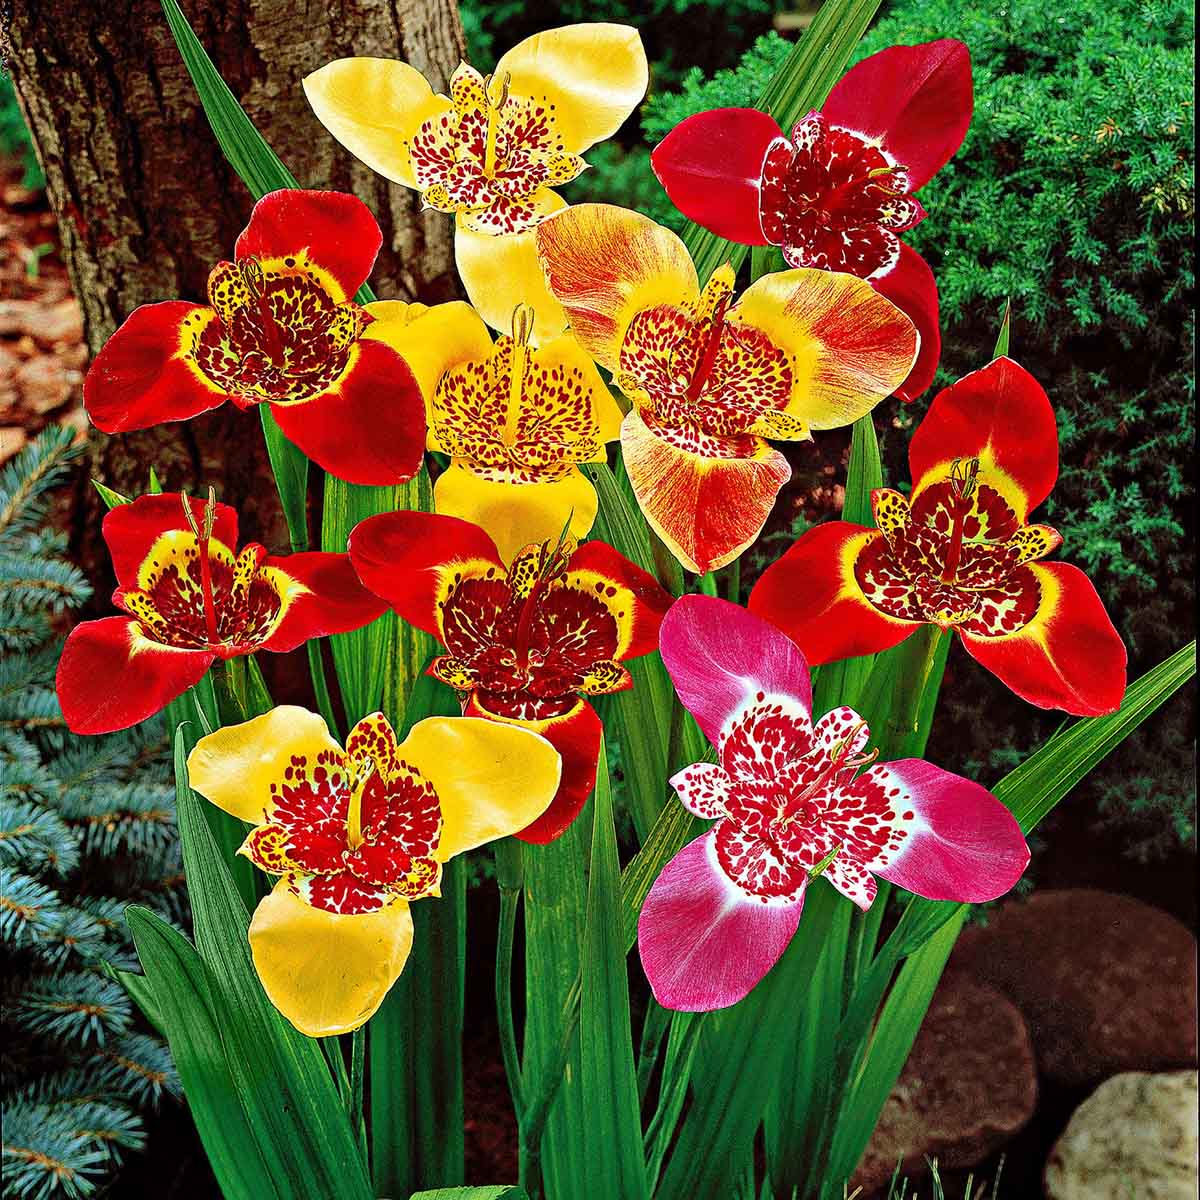 How Long To Germinate Tigridia Bulbs